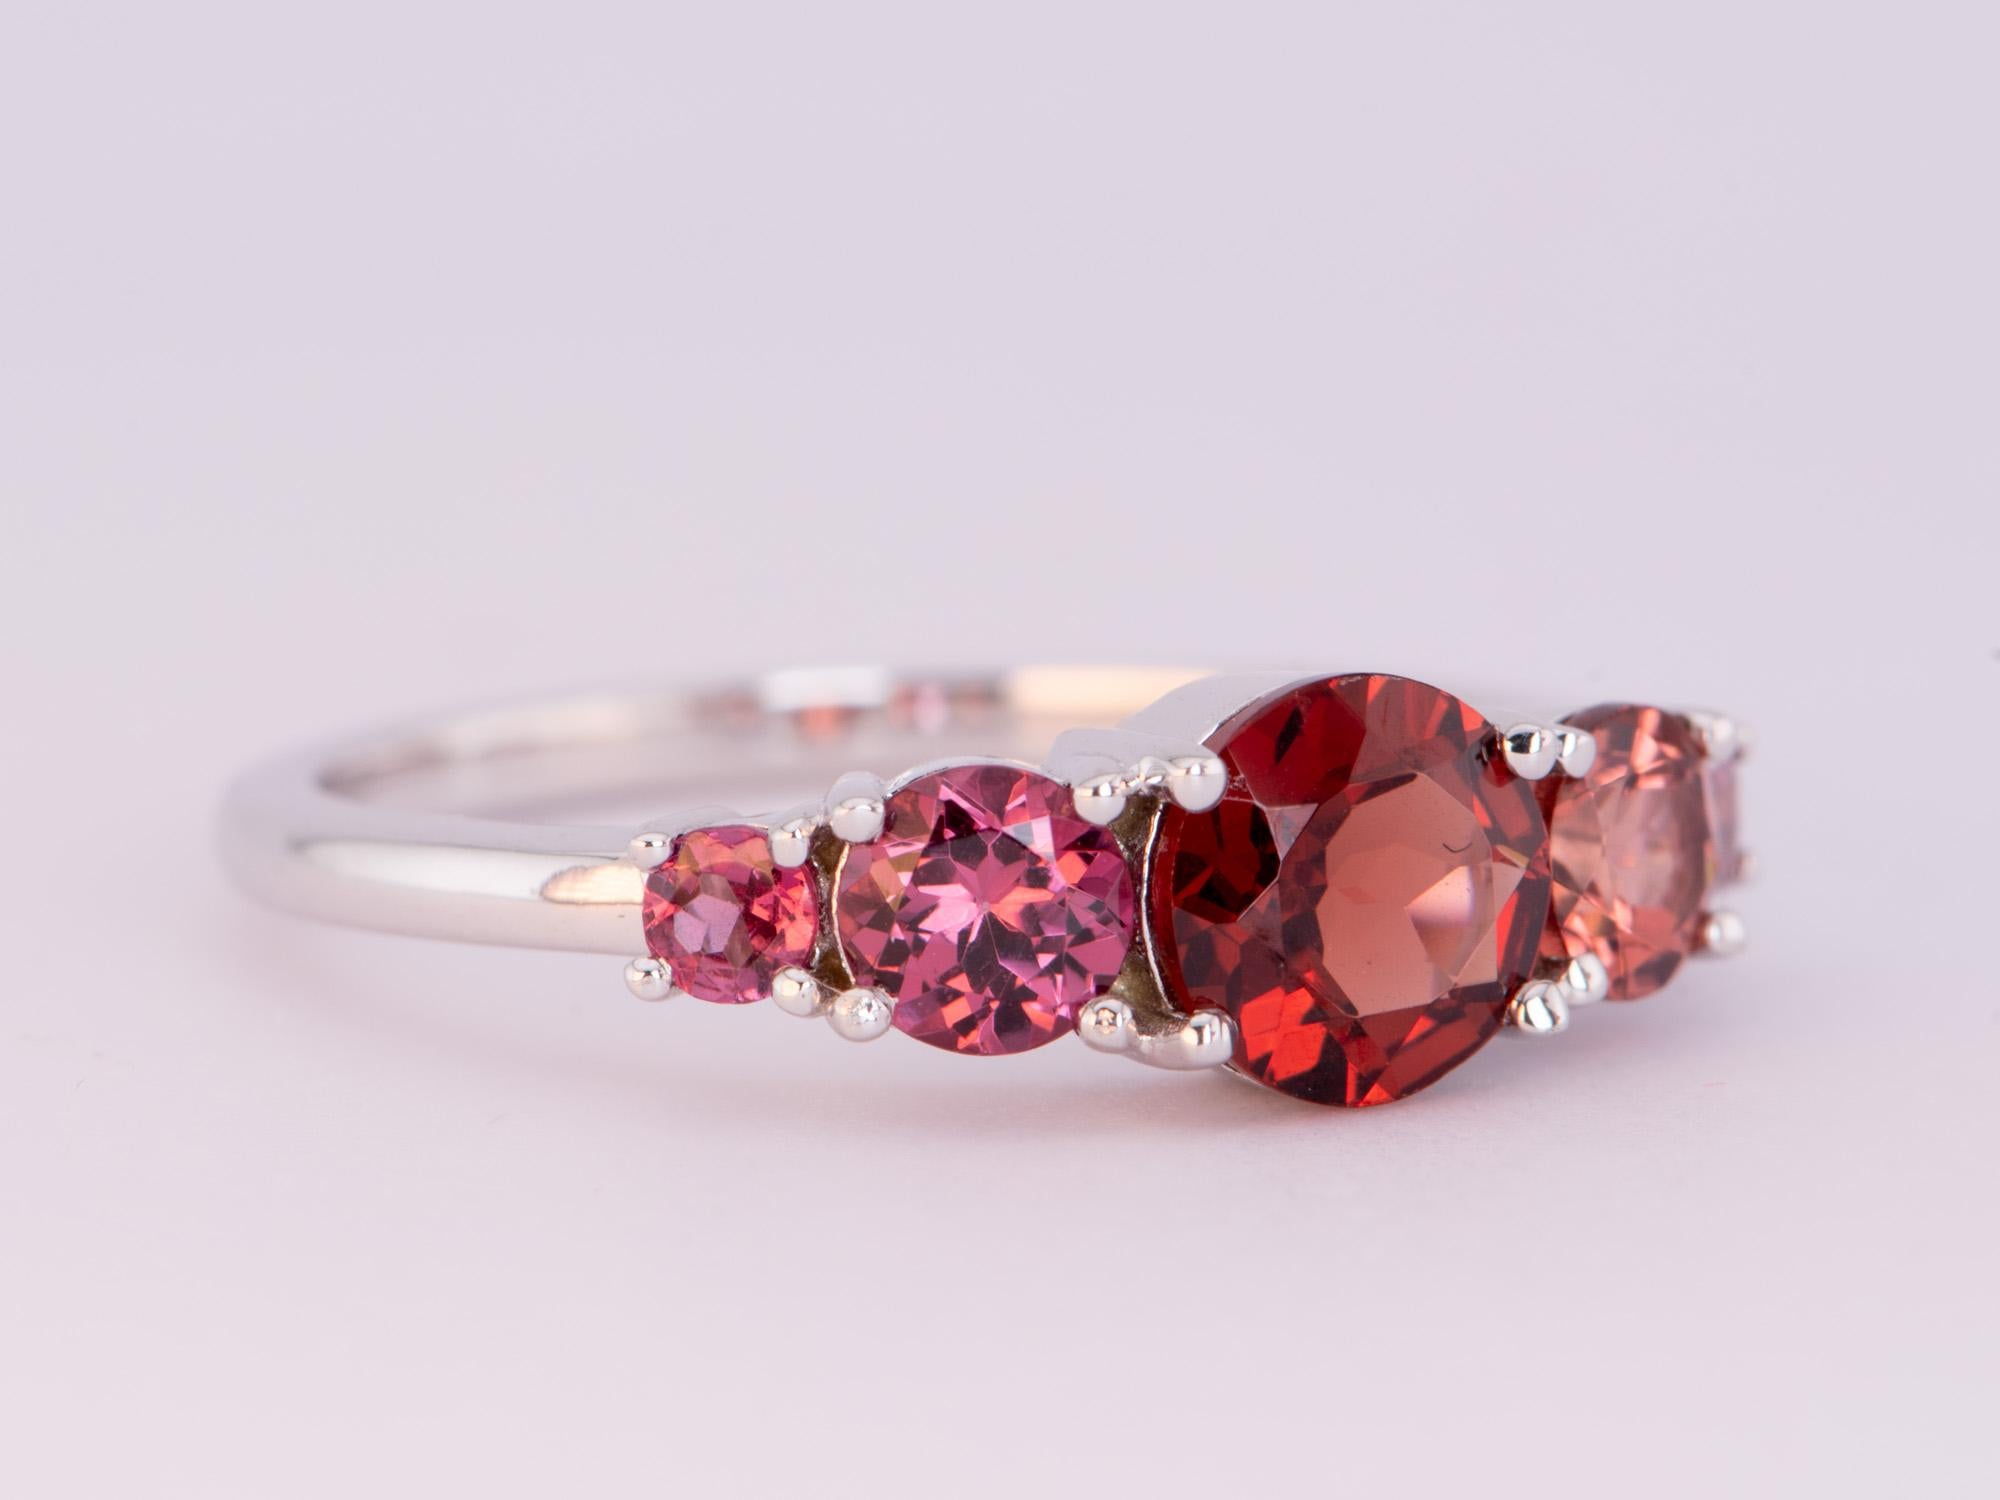 ♥ Mixed Garnet 5-Stone Band 14K Gold
♥ The item measures 5.2mm in length, 17mm in width, and 4.2mm in height.
♥ Material: 14K Gold
♥ Gemstone: Sapphire, 1.87ct total 
♥ You are buying option B from the pictures, US size 7 (Free resizing up or down 1